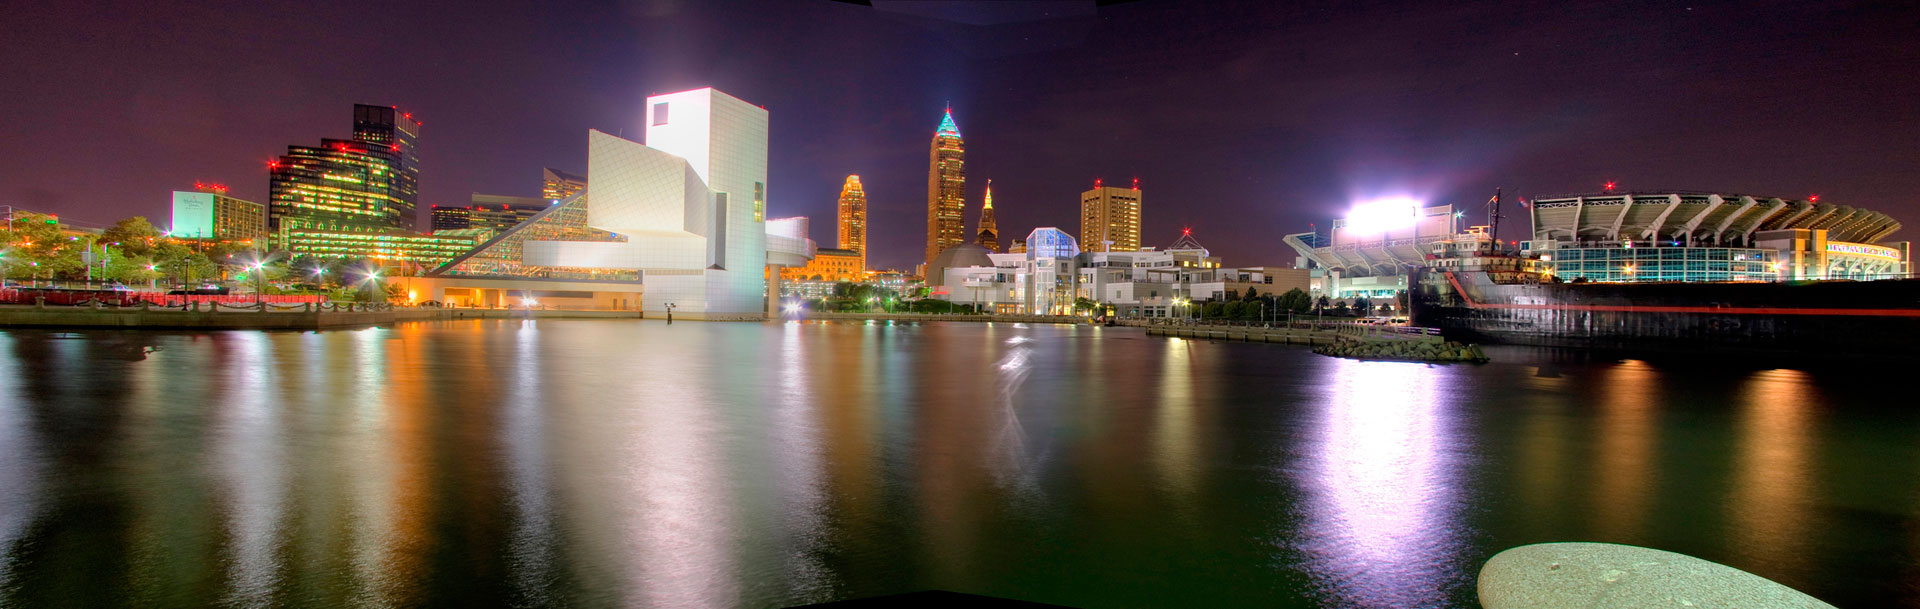 Cleveland Waterfront copyright David Ploenzke all rights reserved 1920x